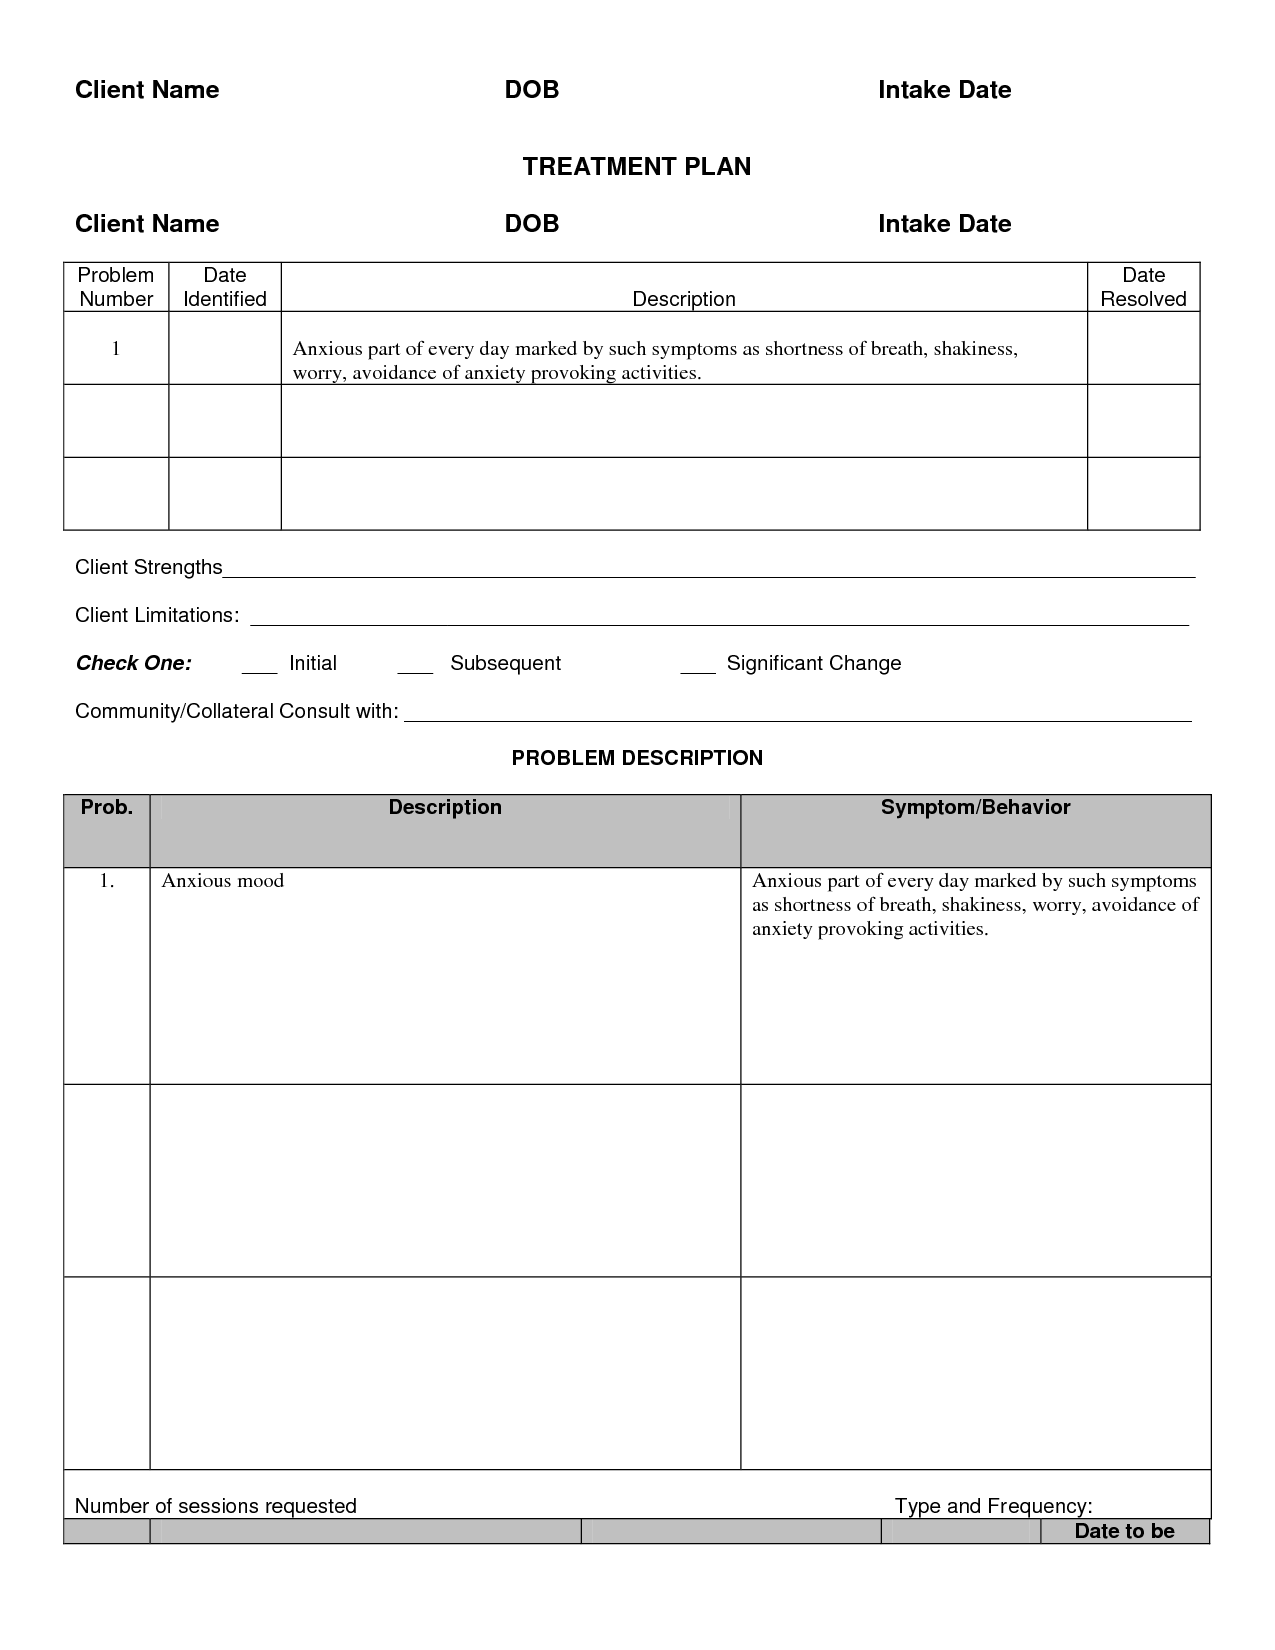 Sample Treatment Plan Template – 7+ Free Documents In Pdf With 